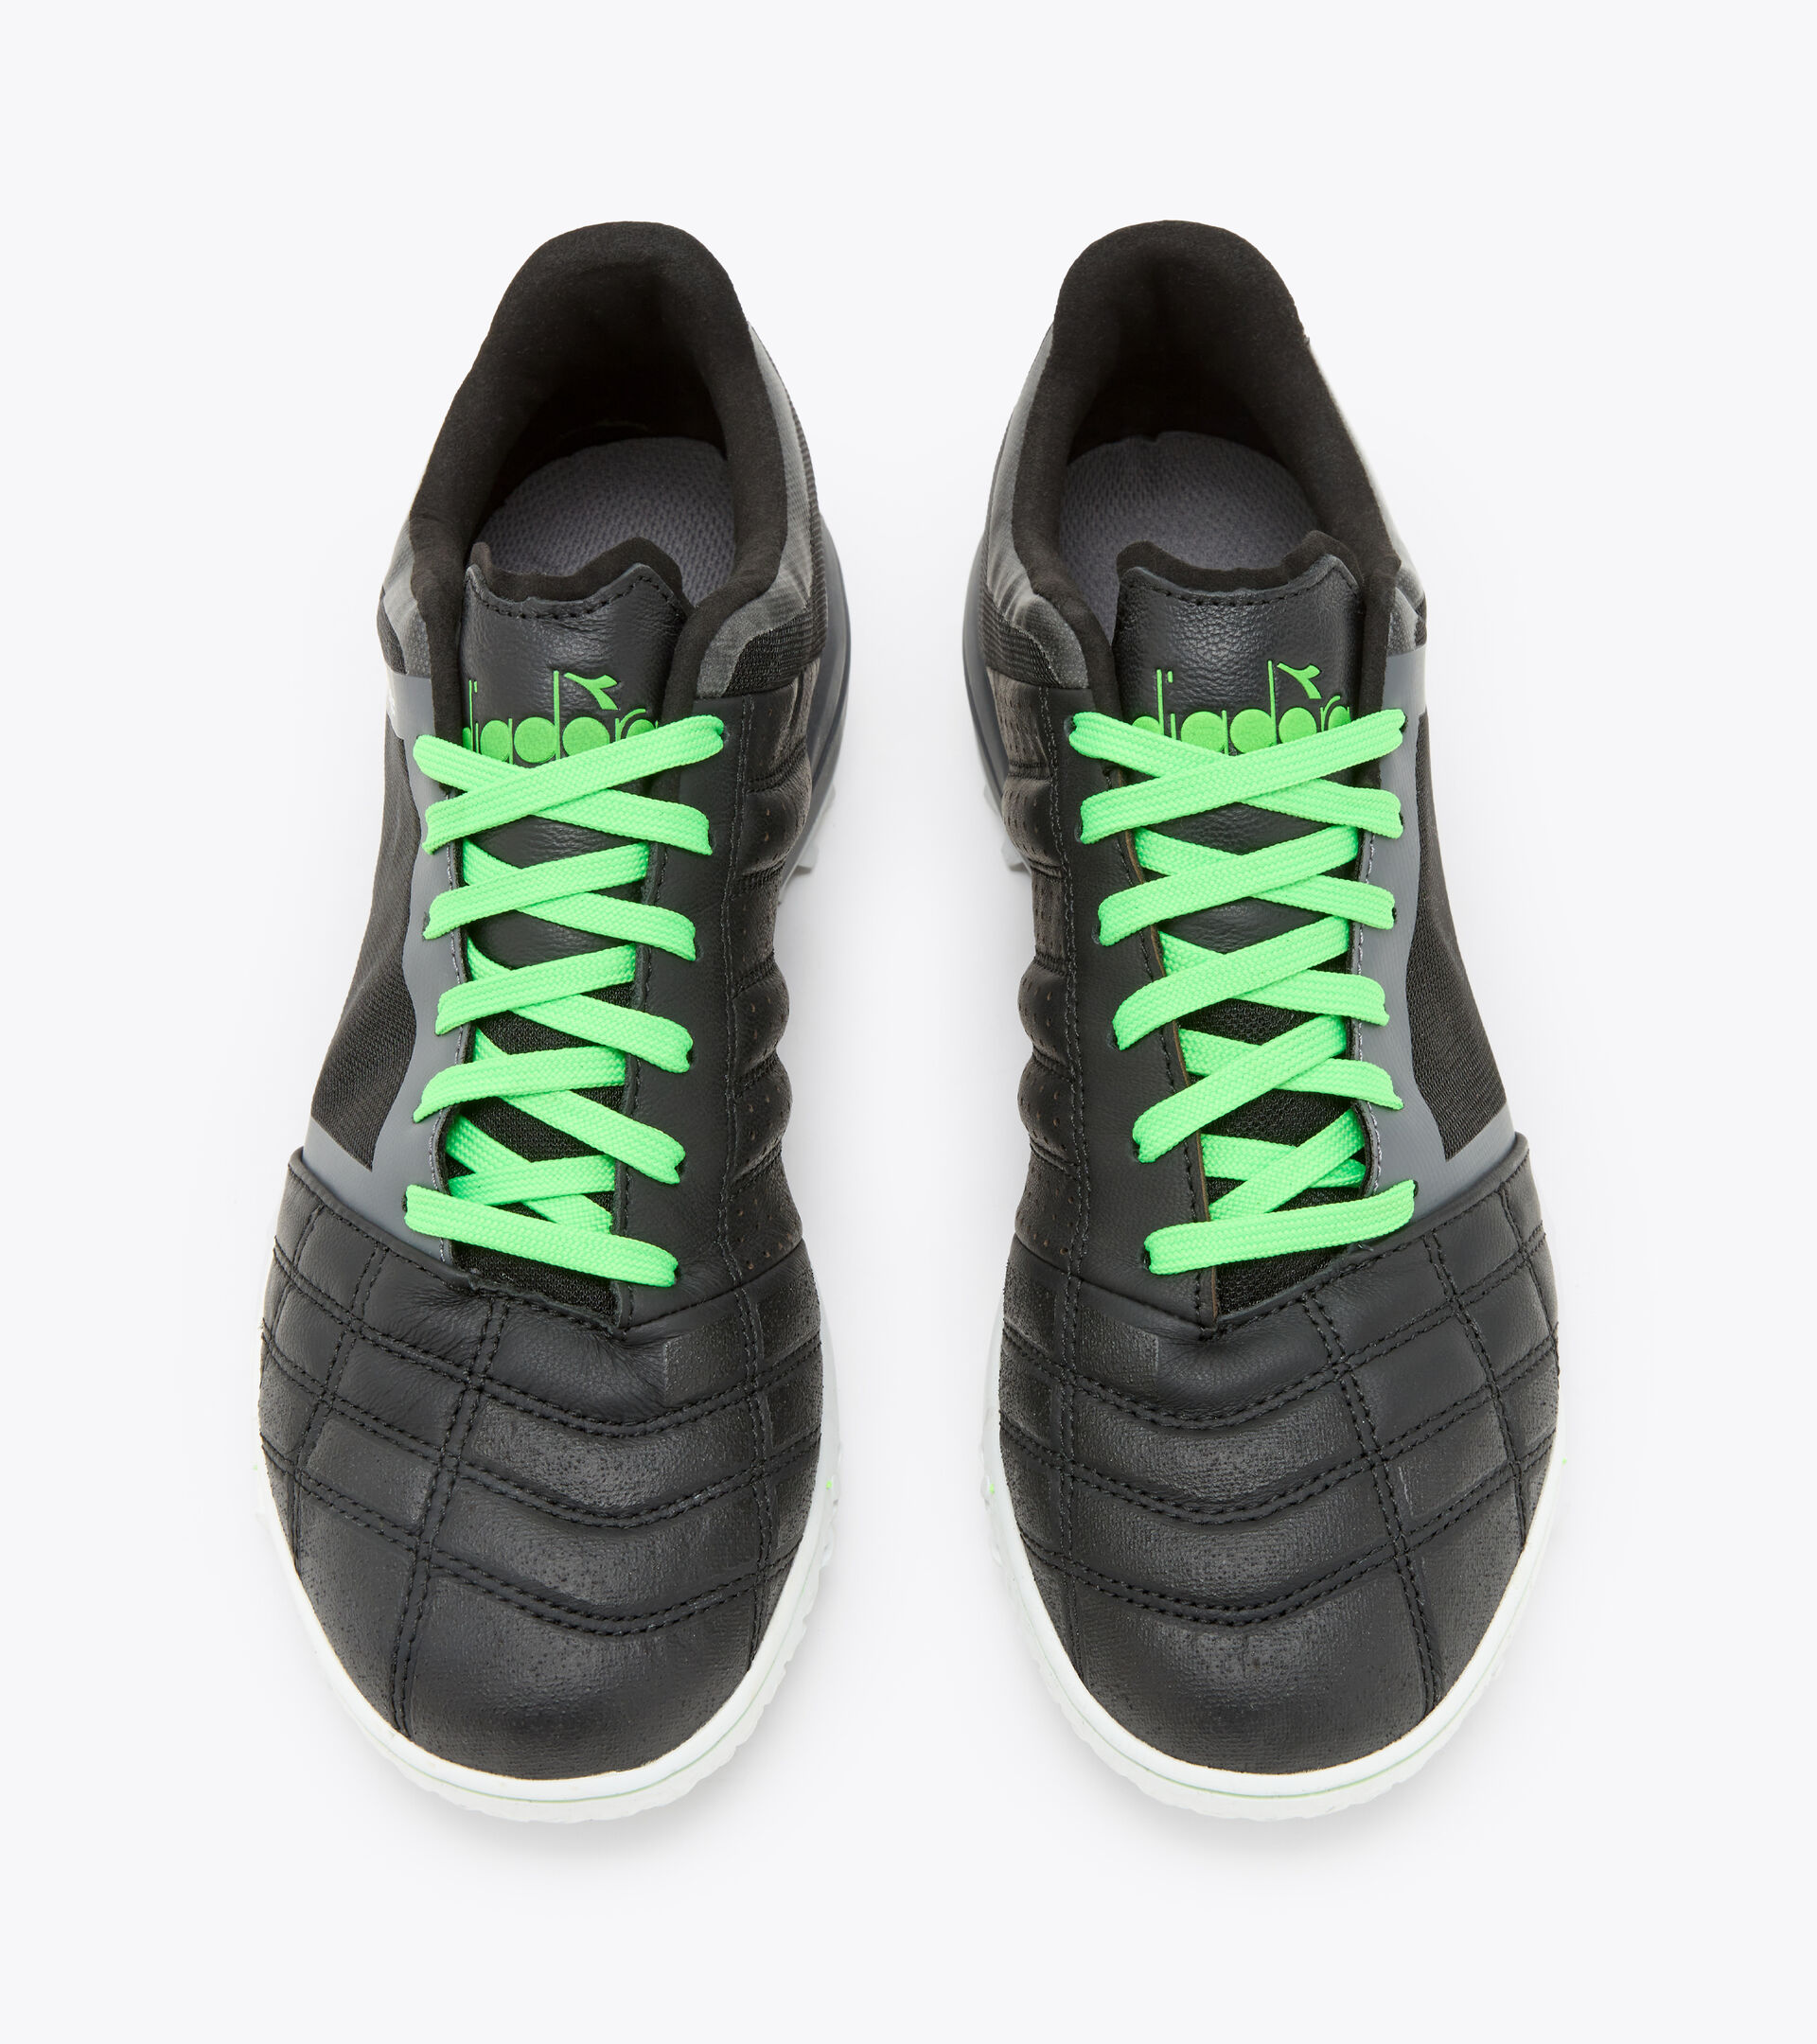 Futsal boot - Specific outsole for synthetic/hard grounds BRASIL SALA TF BLACK/GREEN FLUO - Diadora